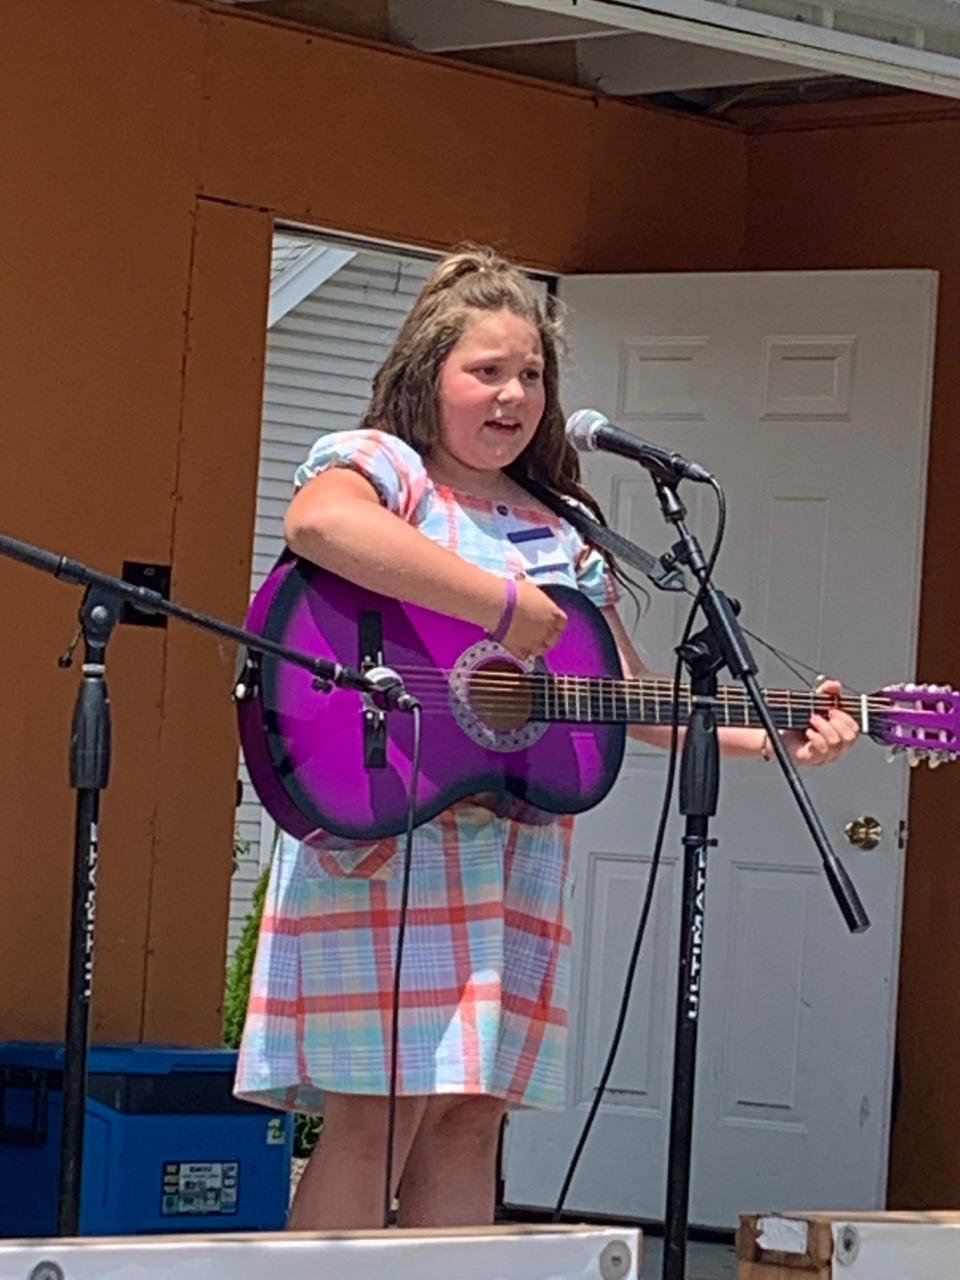 Isla Dotts sings "Animal Crackers" by Dolly Parton to take second place.